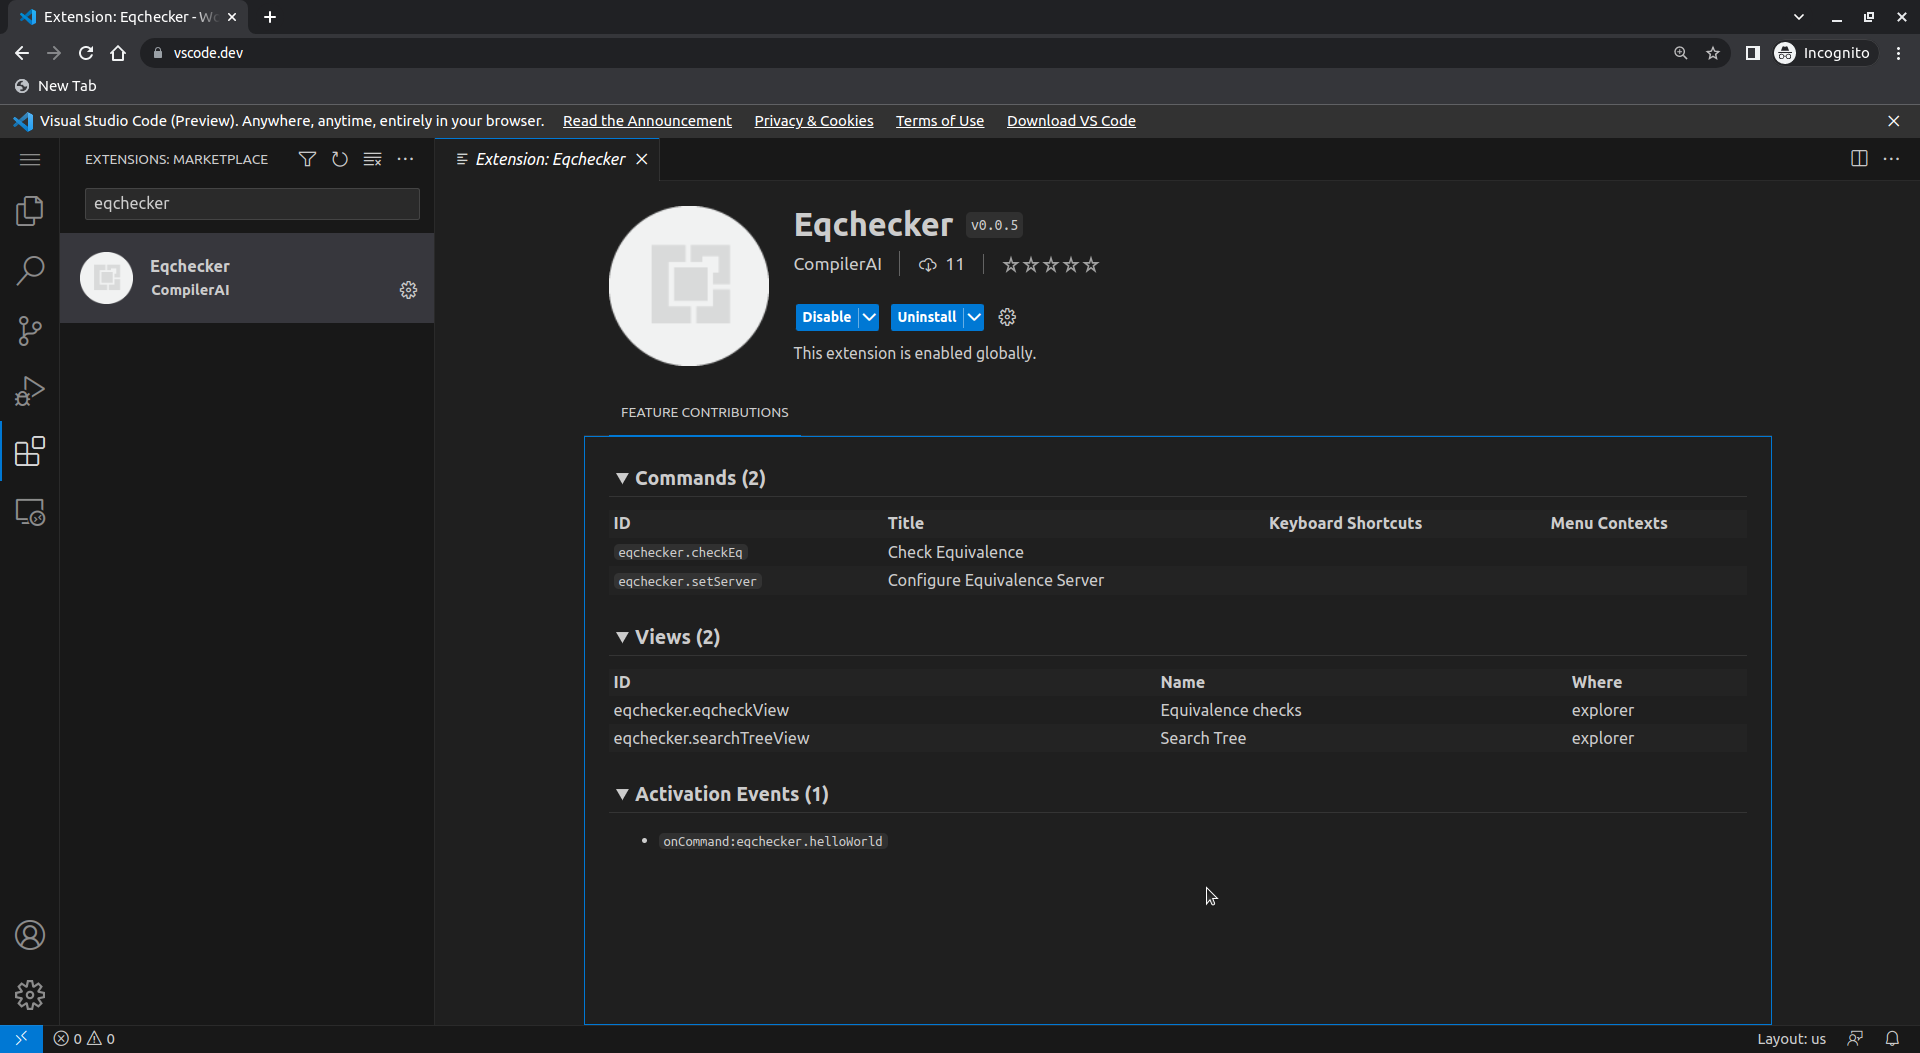 Check that the Eqchecker extension is installed.